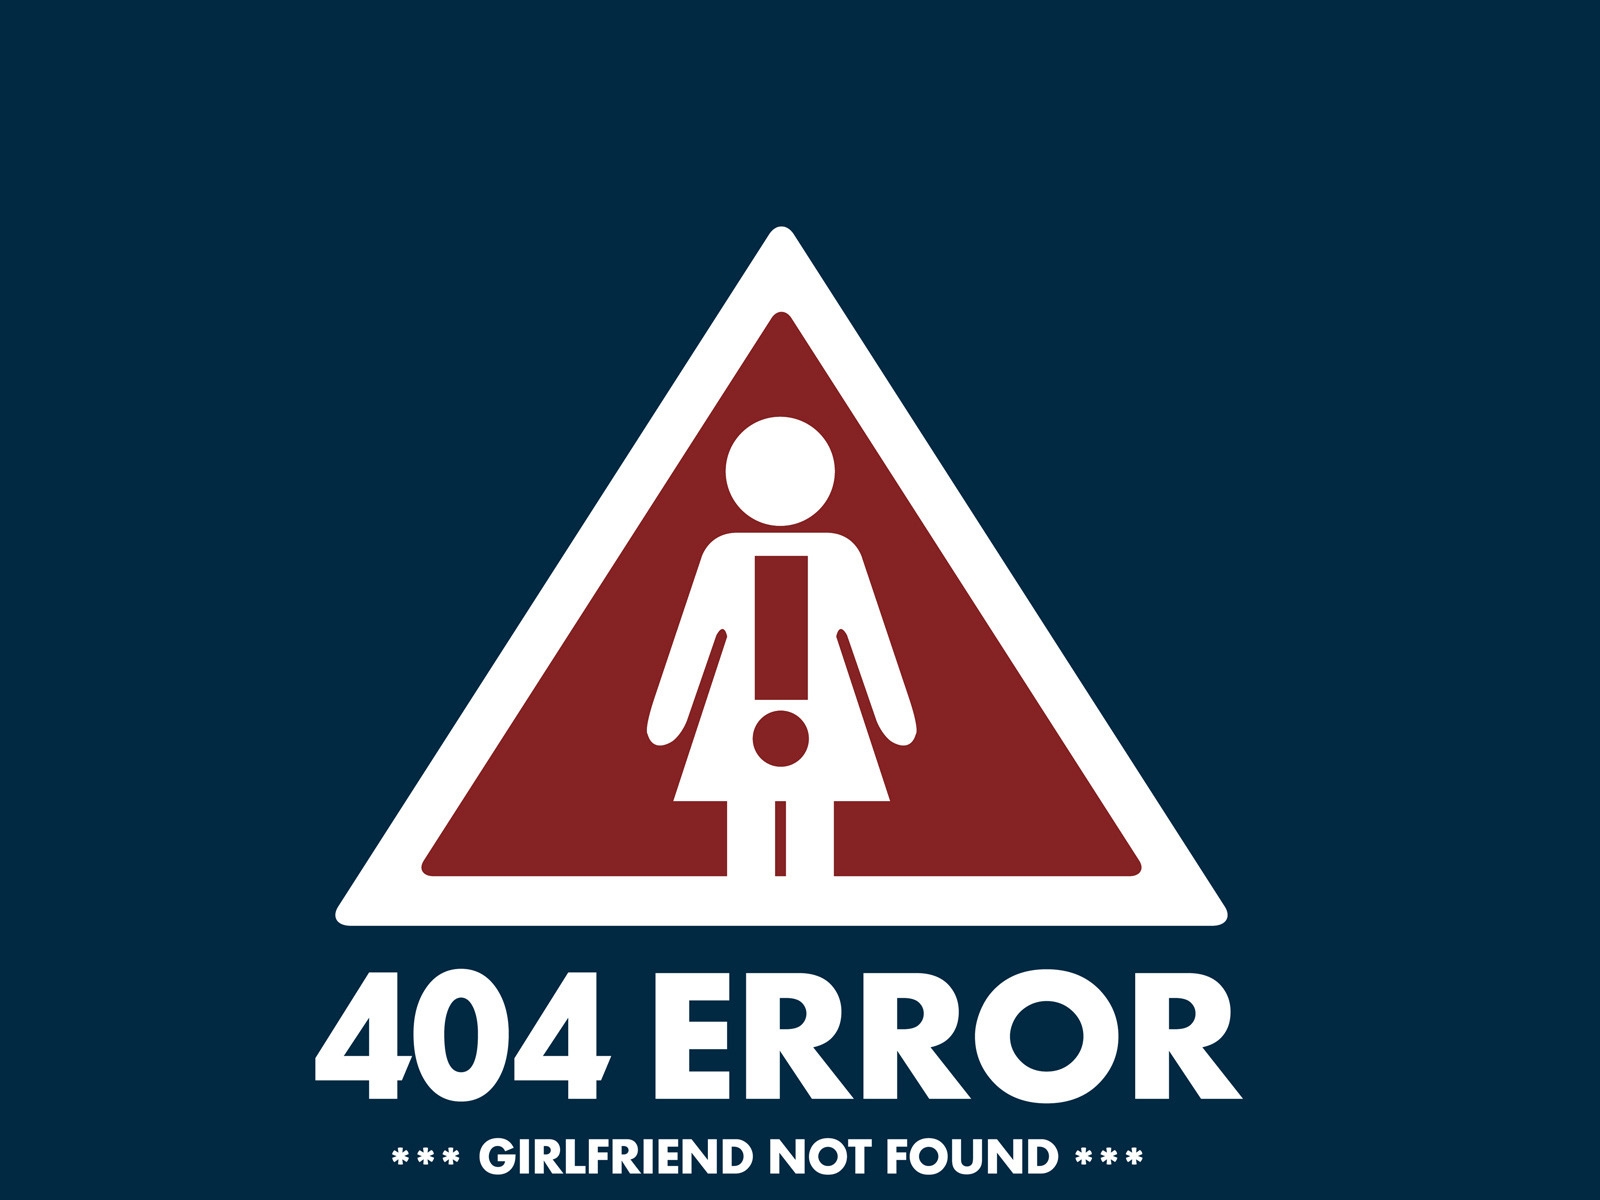 404 Error Page for 1600 x 1200 resolution